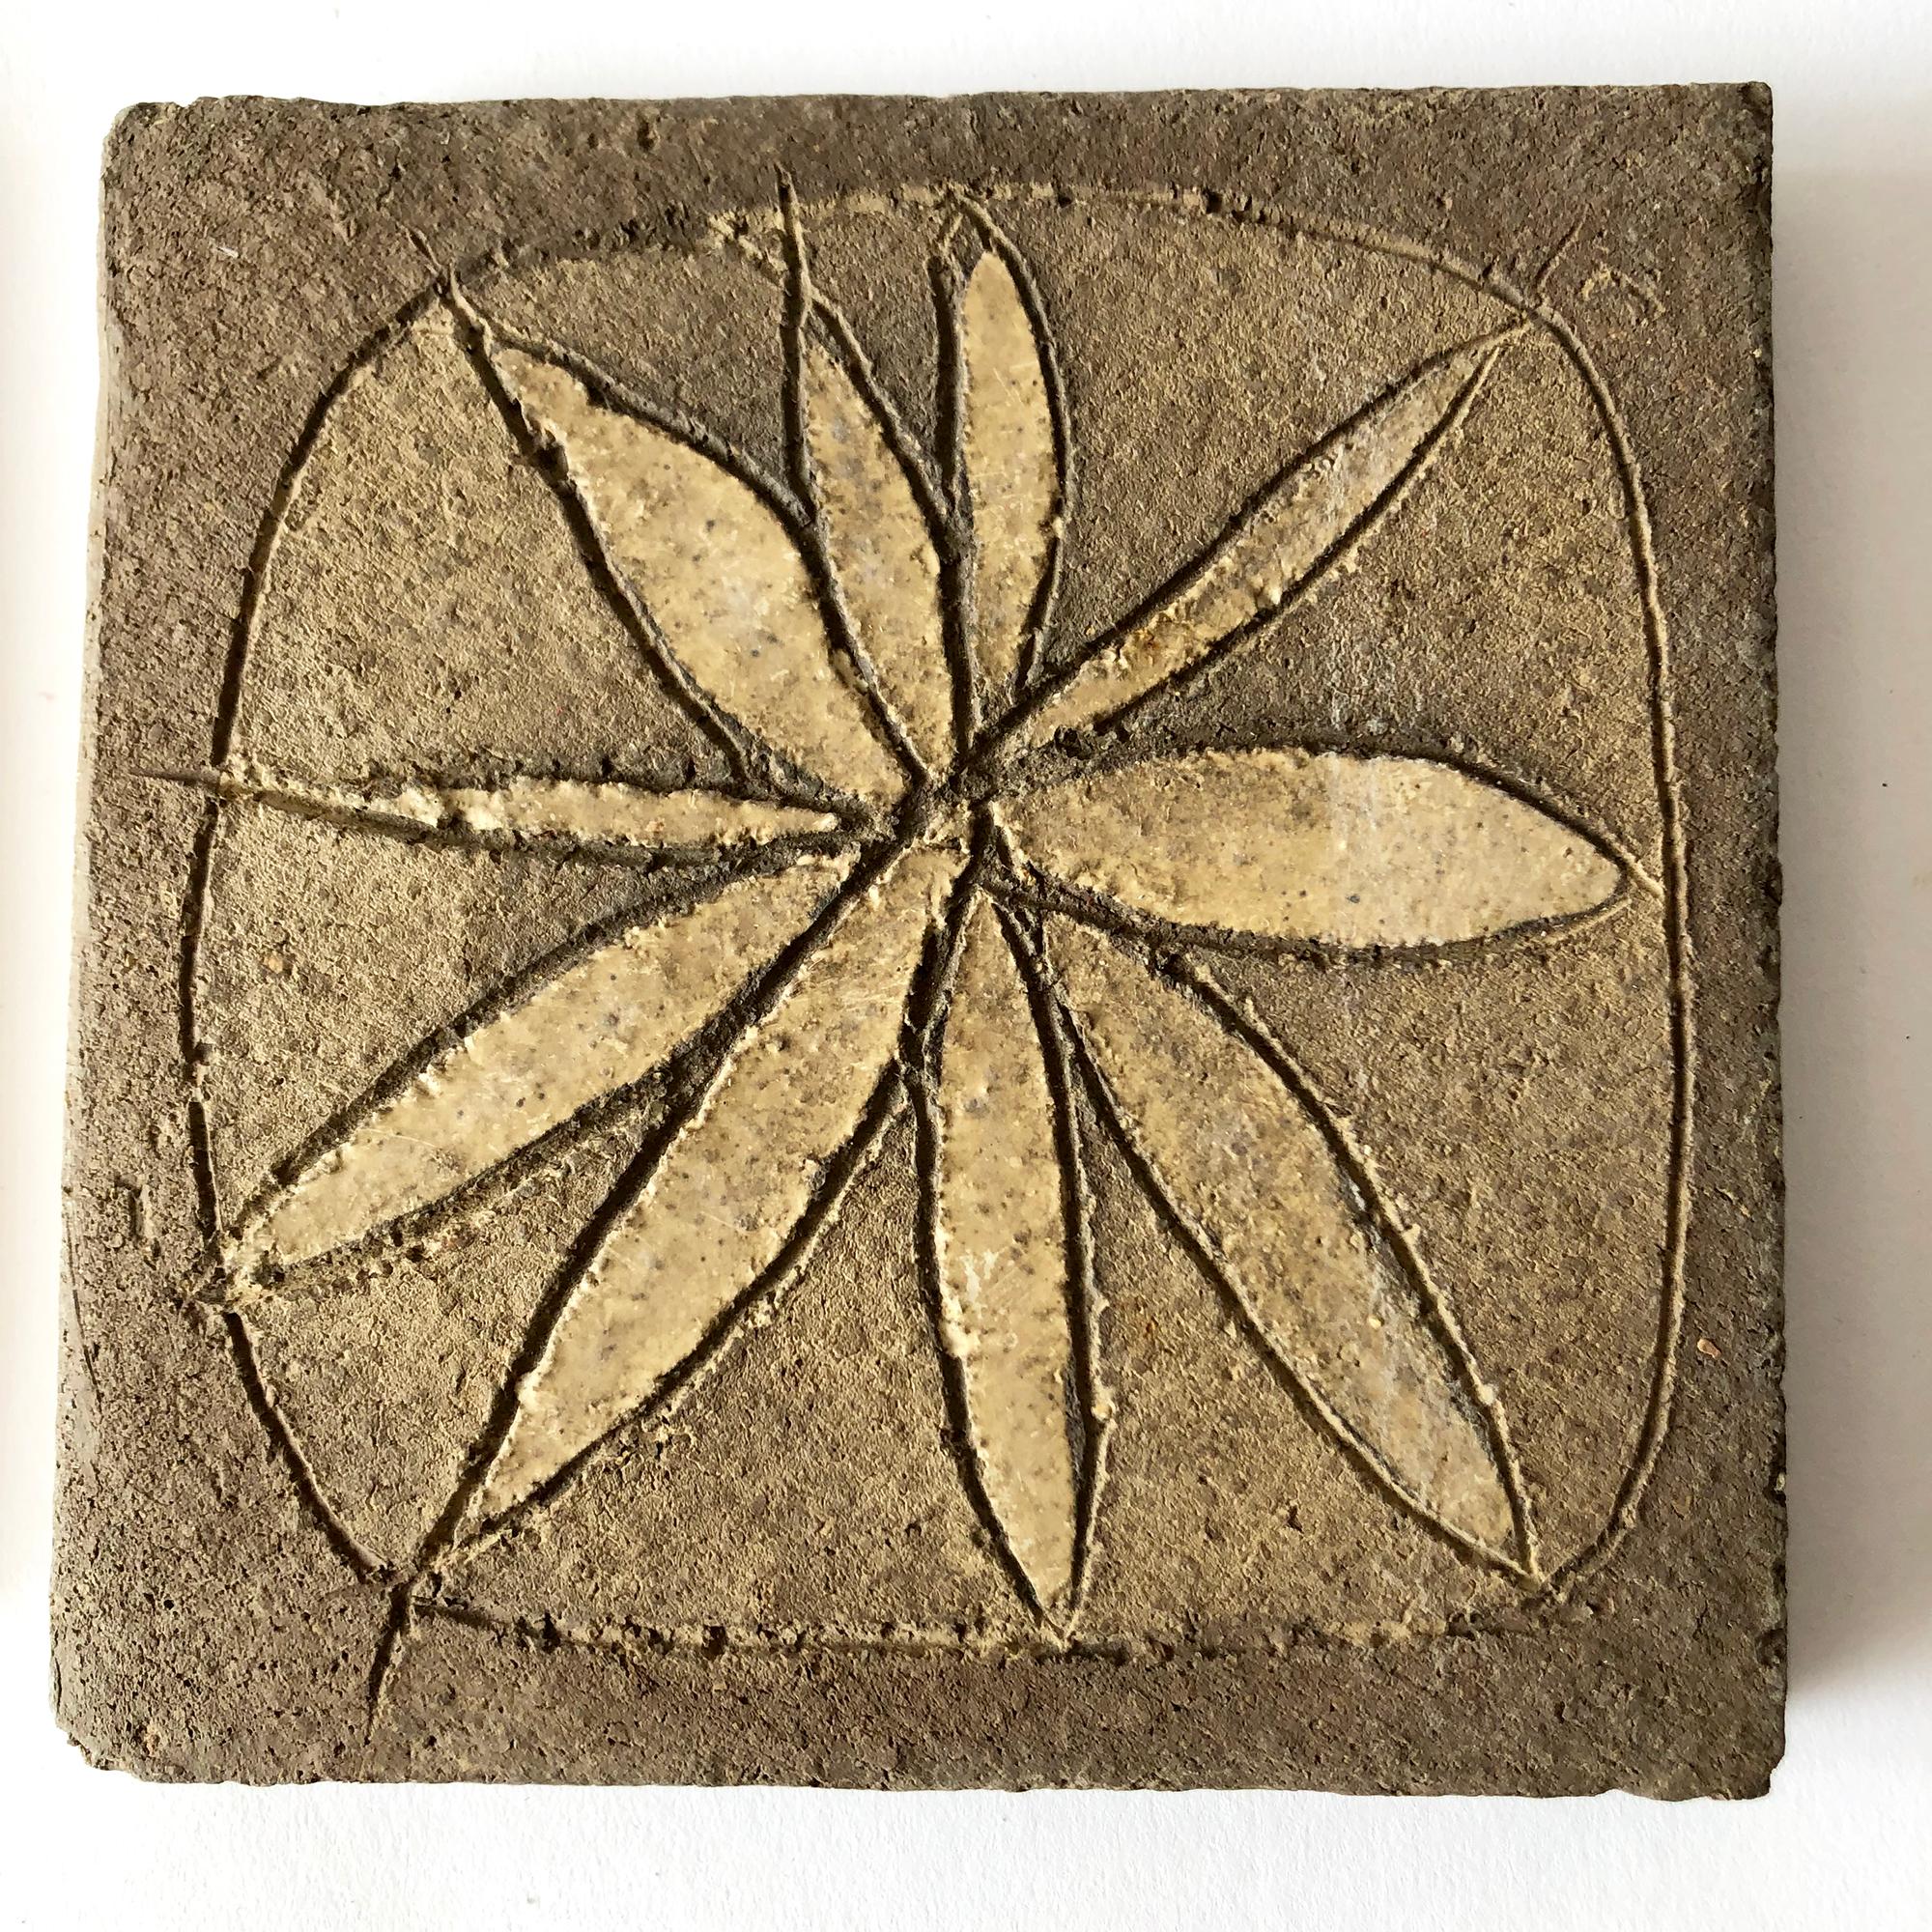 Set of four stoneware tiles with sgraffito flower design created by Stan Bitters for Hans Sumph. Tiles measure approximately 5.75